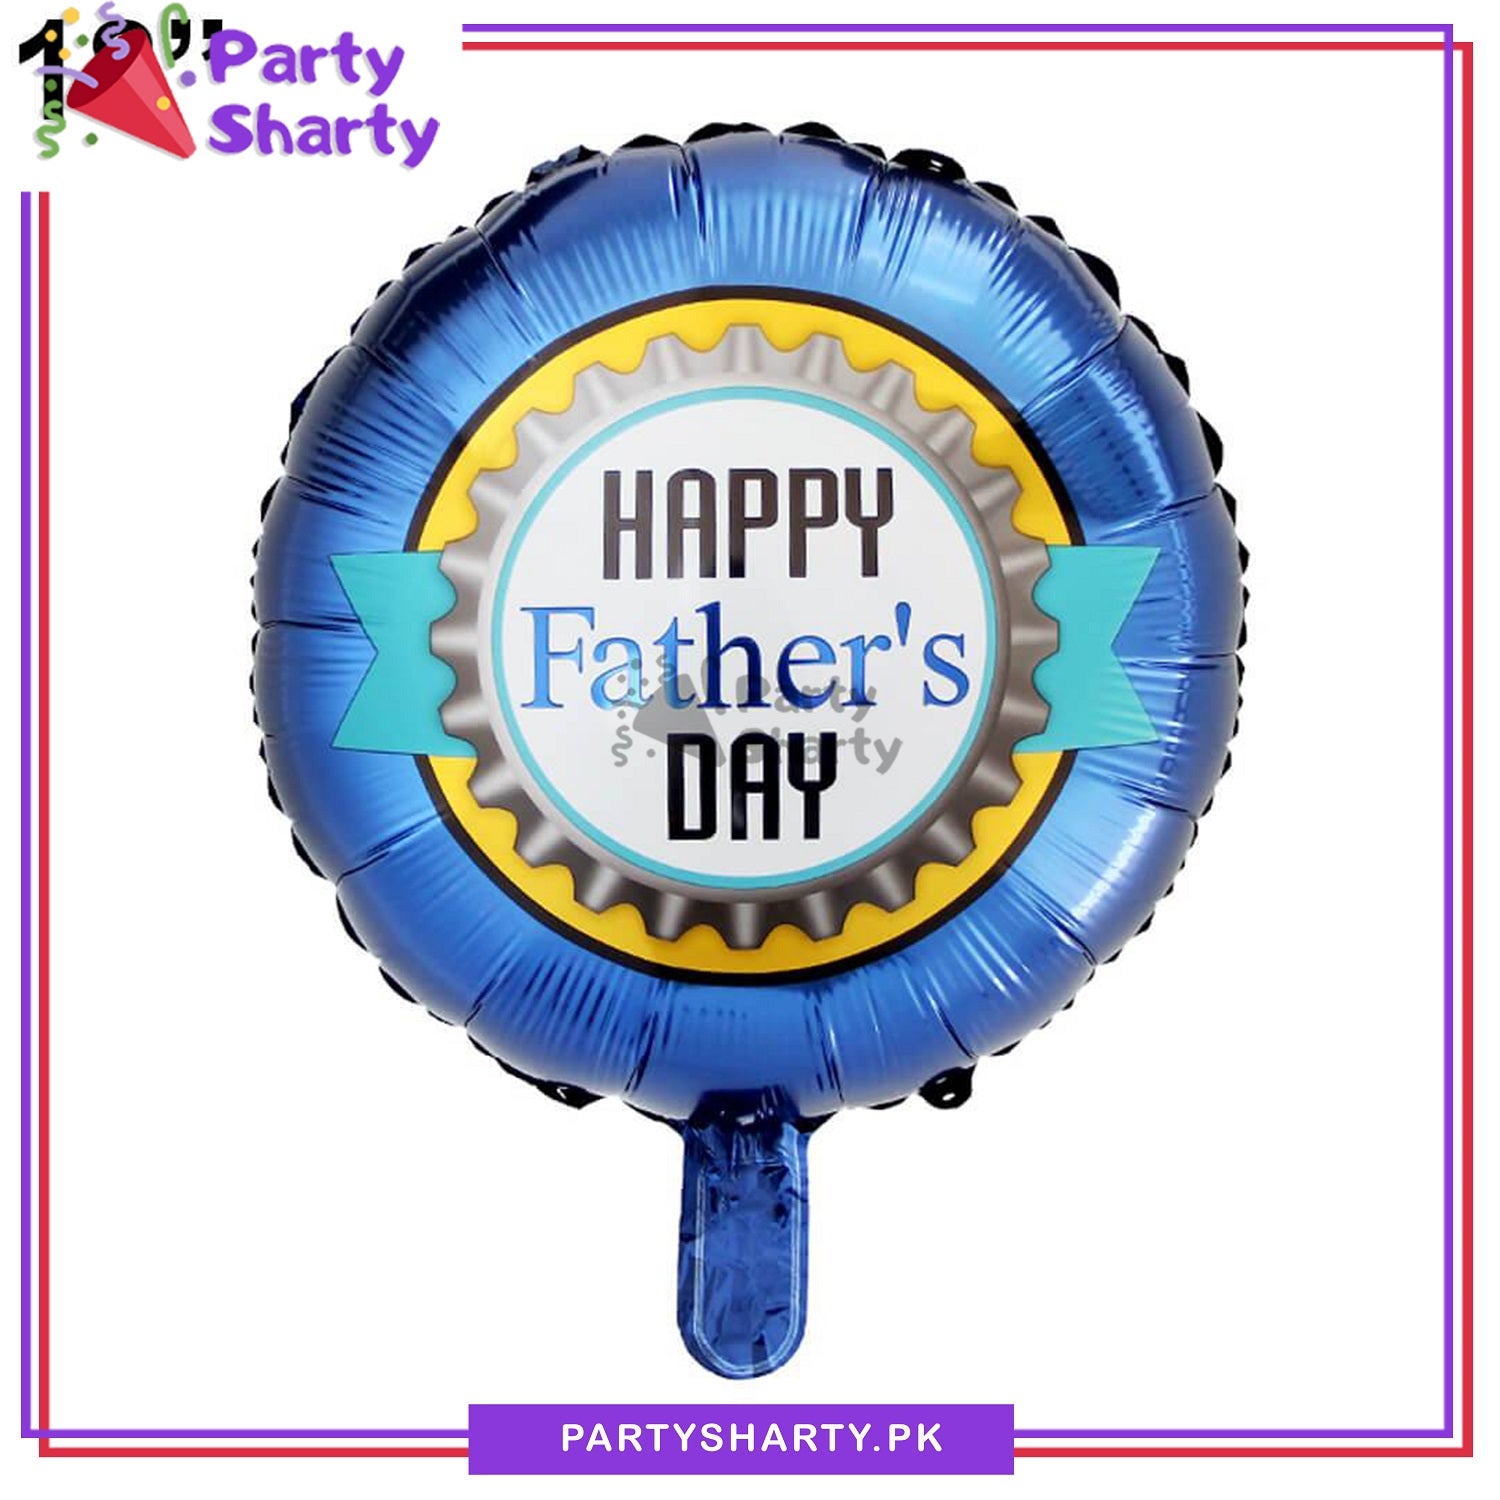 Happy Father's Day Round Foil Balloon For Father's Day Celebration